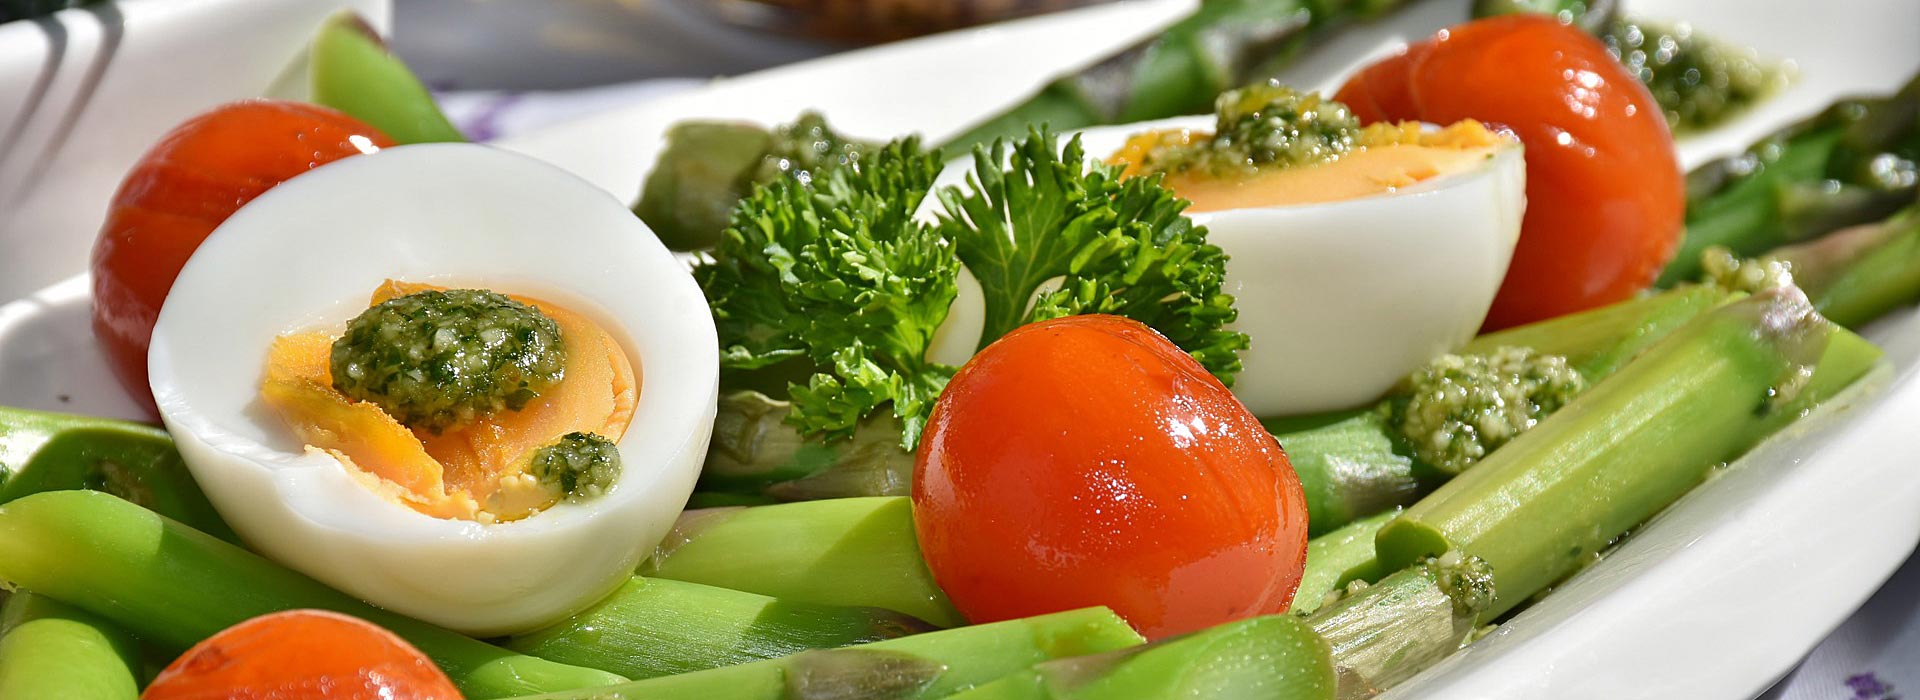 healthy meal plan with egg, veggies and asparagus